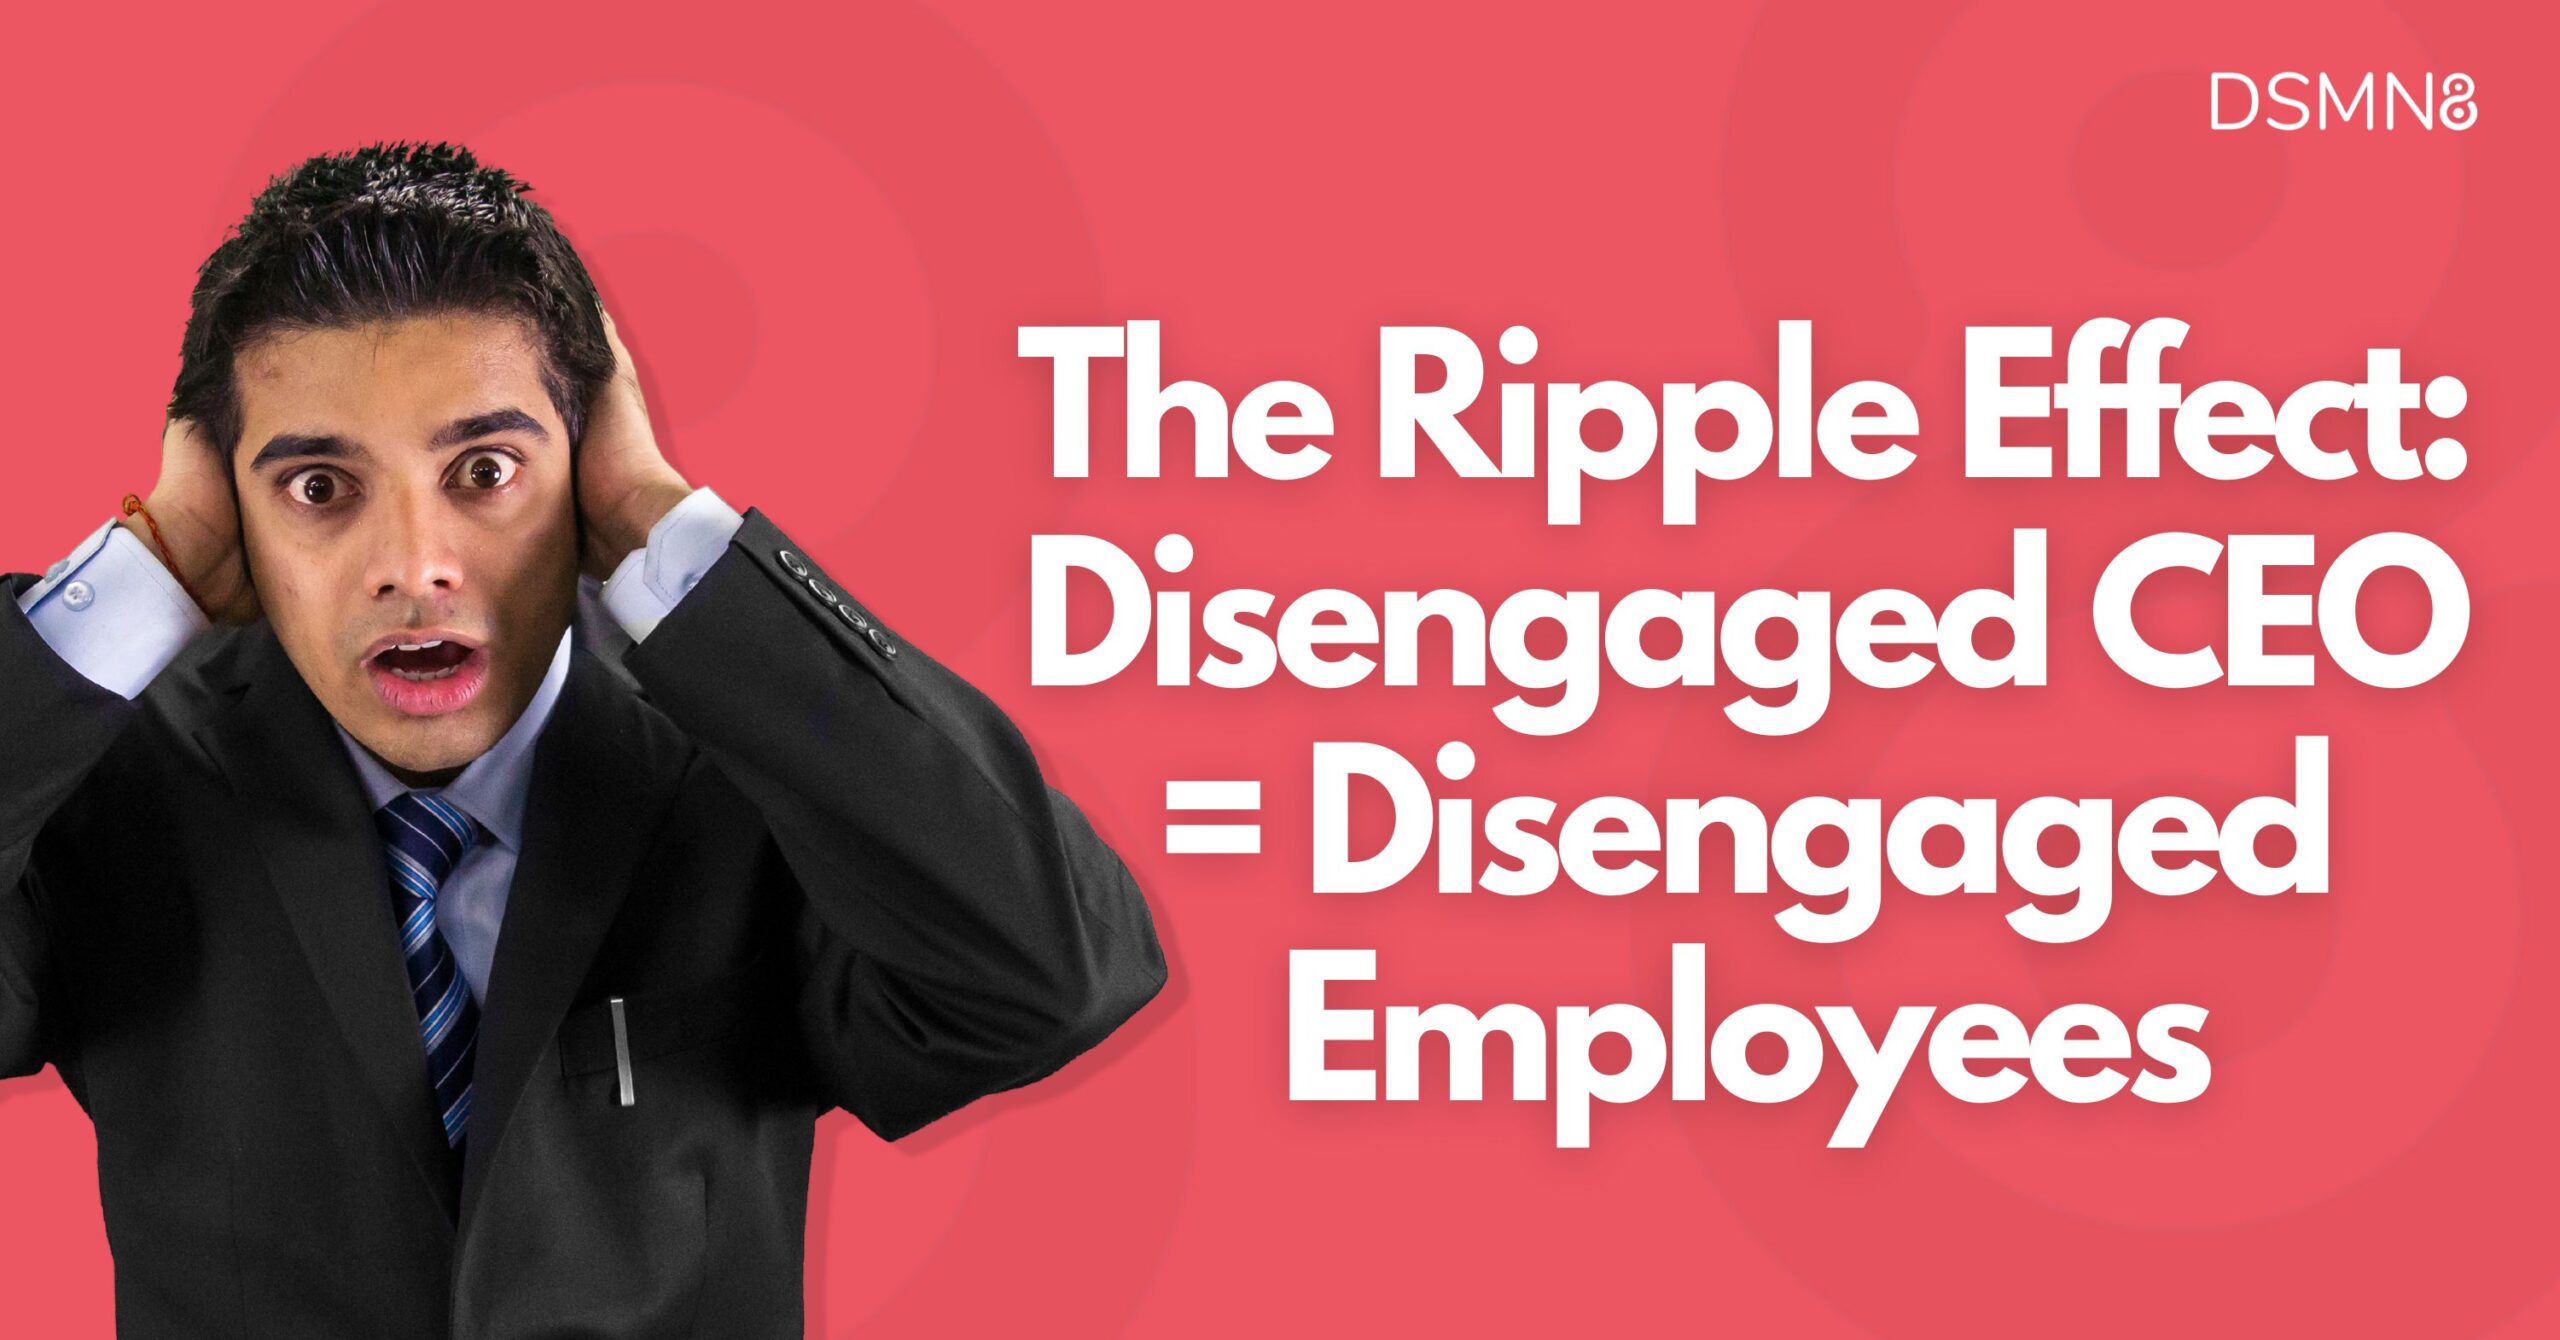 How a Disengaged CEO Impacts Employee Engagement